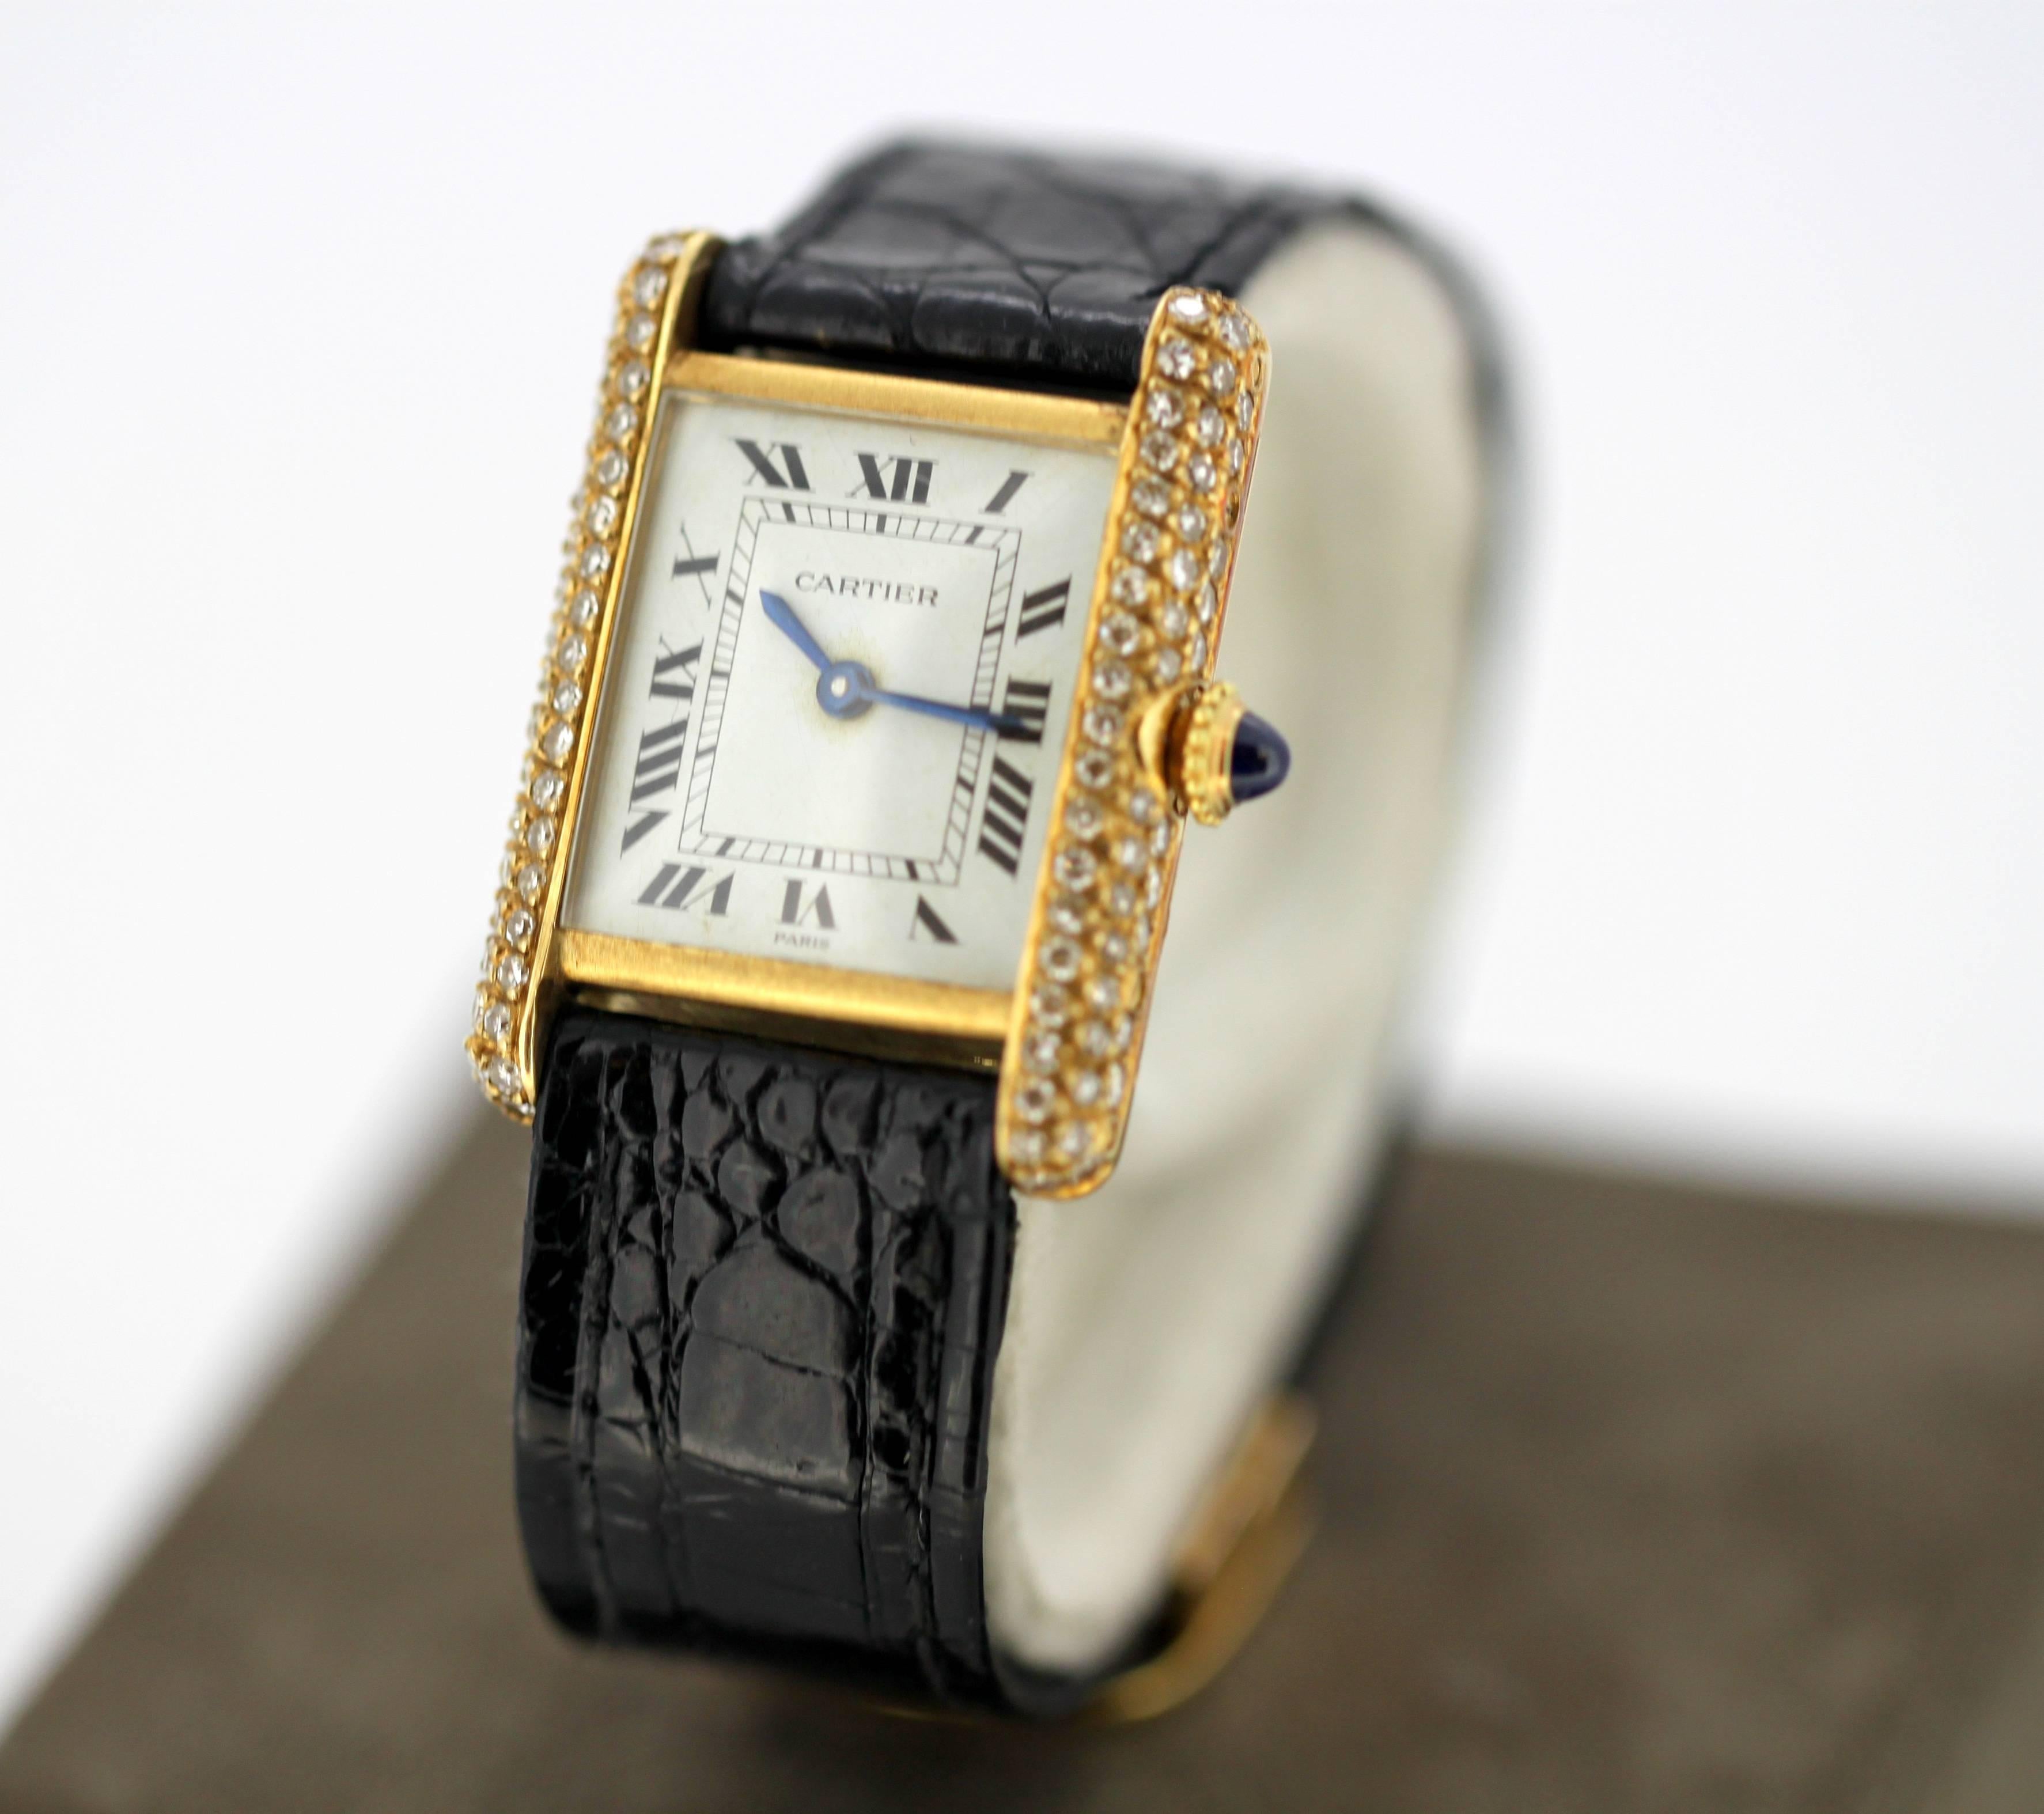 Vintage Ladies Cartier Tank Louis watch in 18k gold and bezel set with diamonds, Circa.1960's

Gender: Ladies
Case Size : 28 x 26 mm
Movement: Manual Winding
Watchband Material: 18k gold buckle and leather strap. (Original by Cartier)
Case material